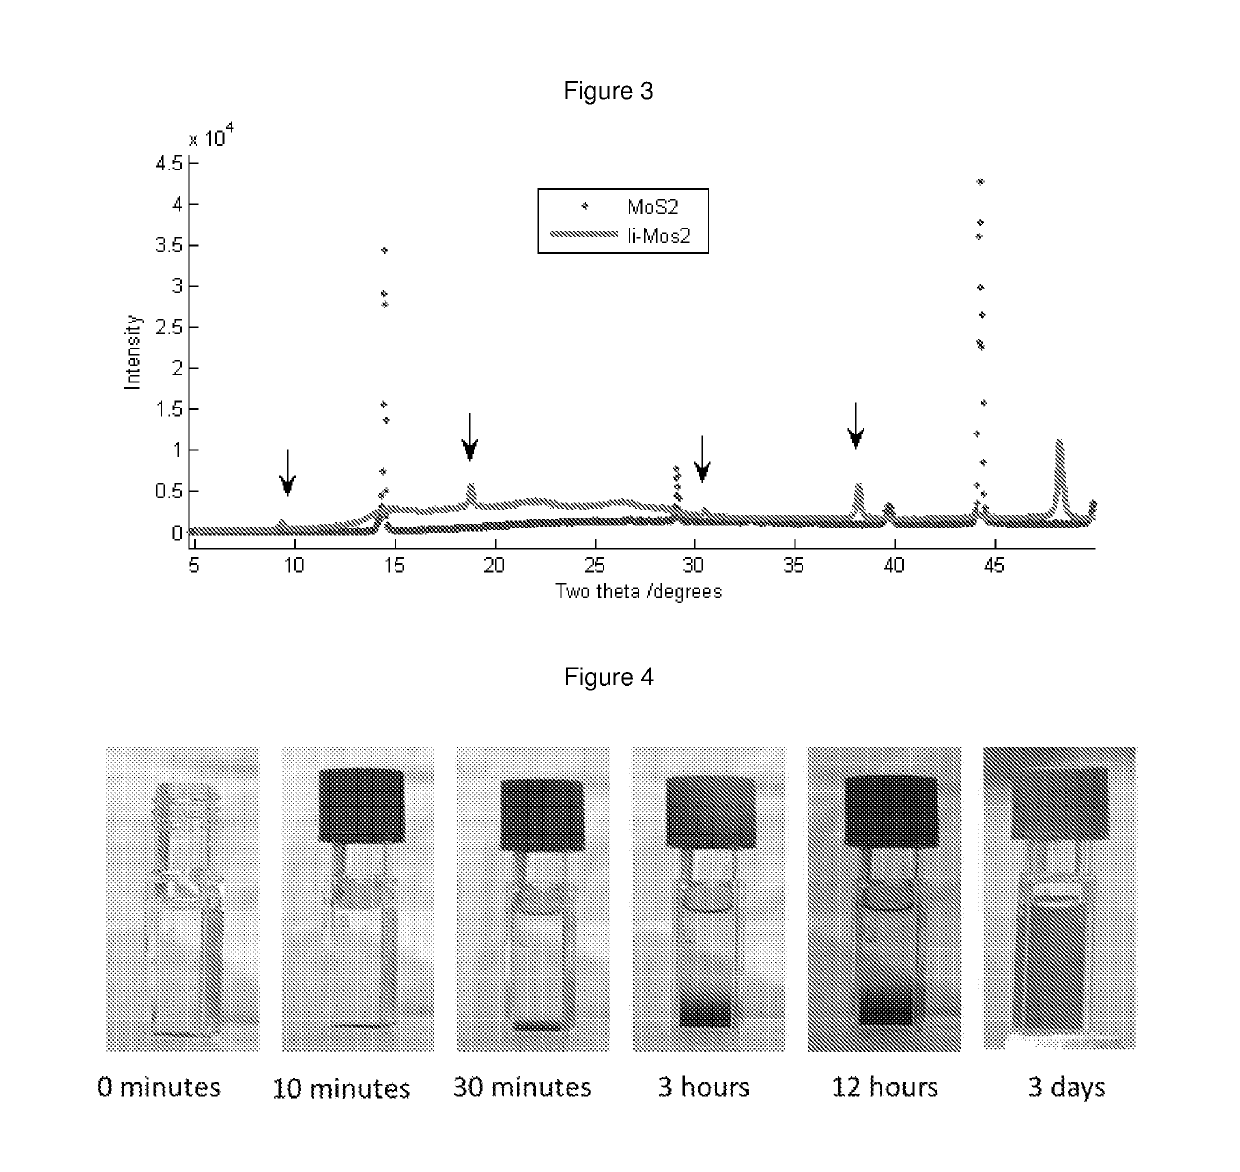 Method for producing dispersions of nanosheets